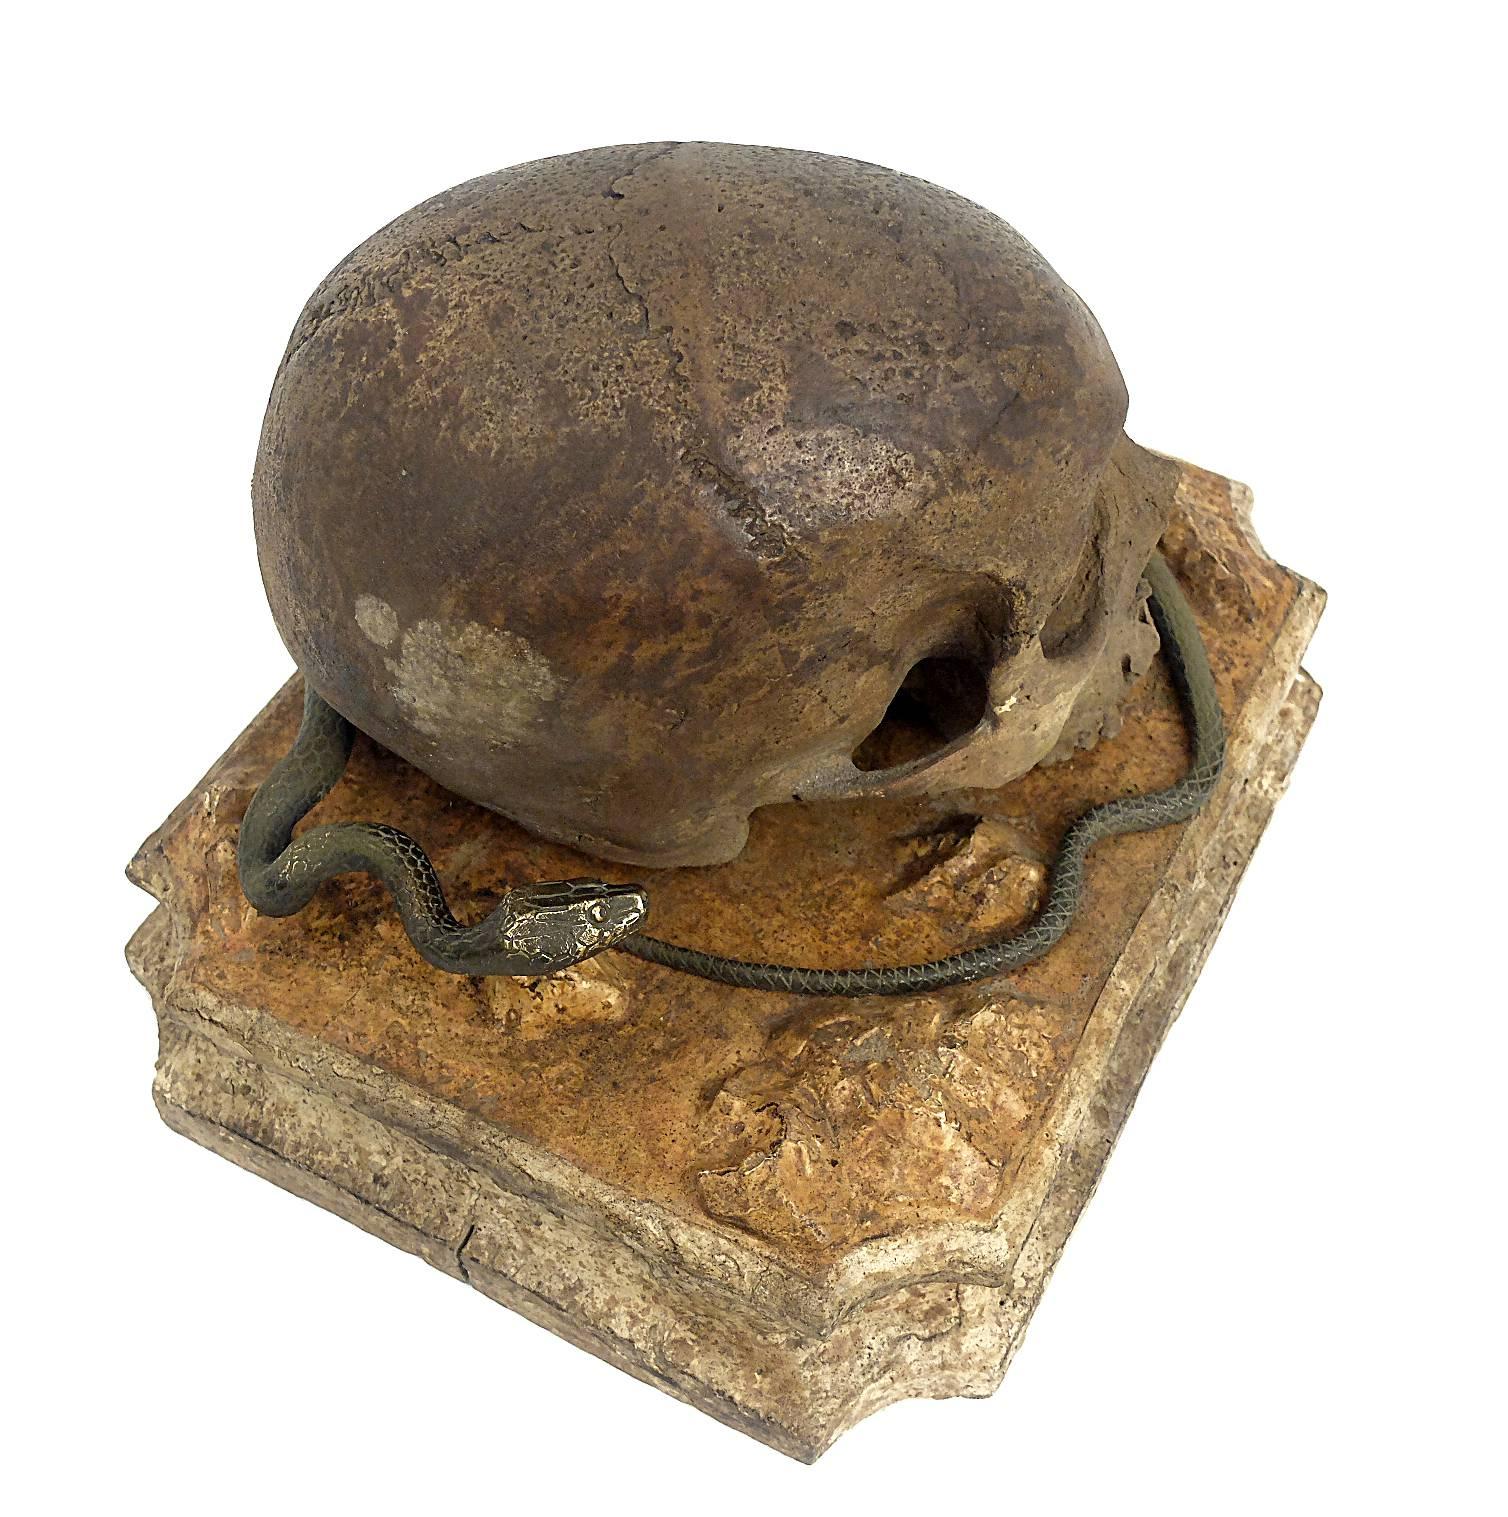 Memento Mori, a Skull Sculpture Out of Chalk, with a Bronze Snake, Italy 2